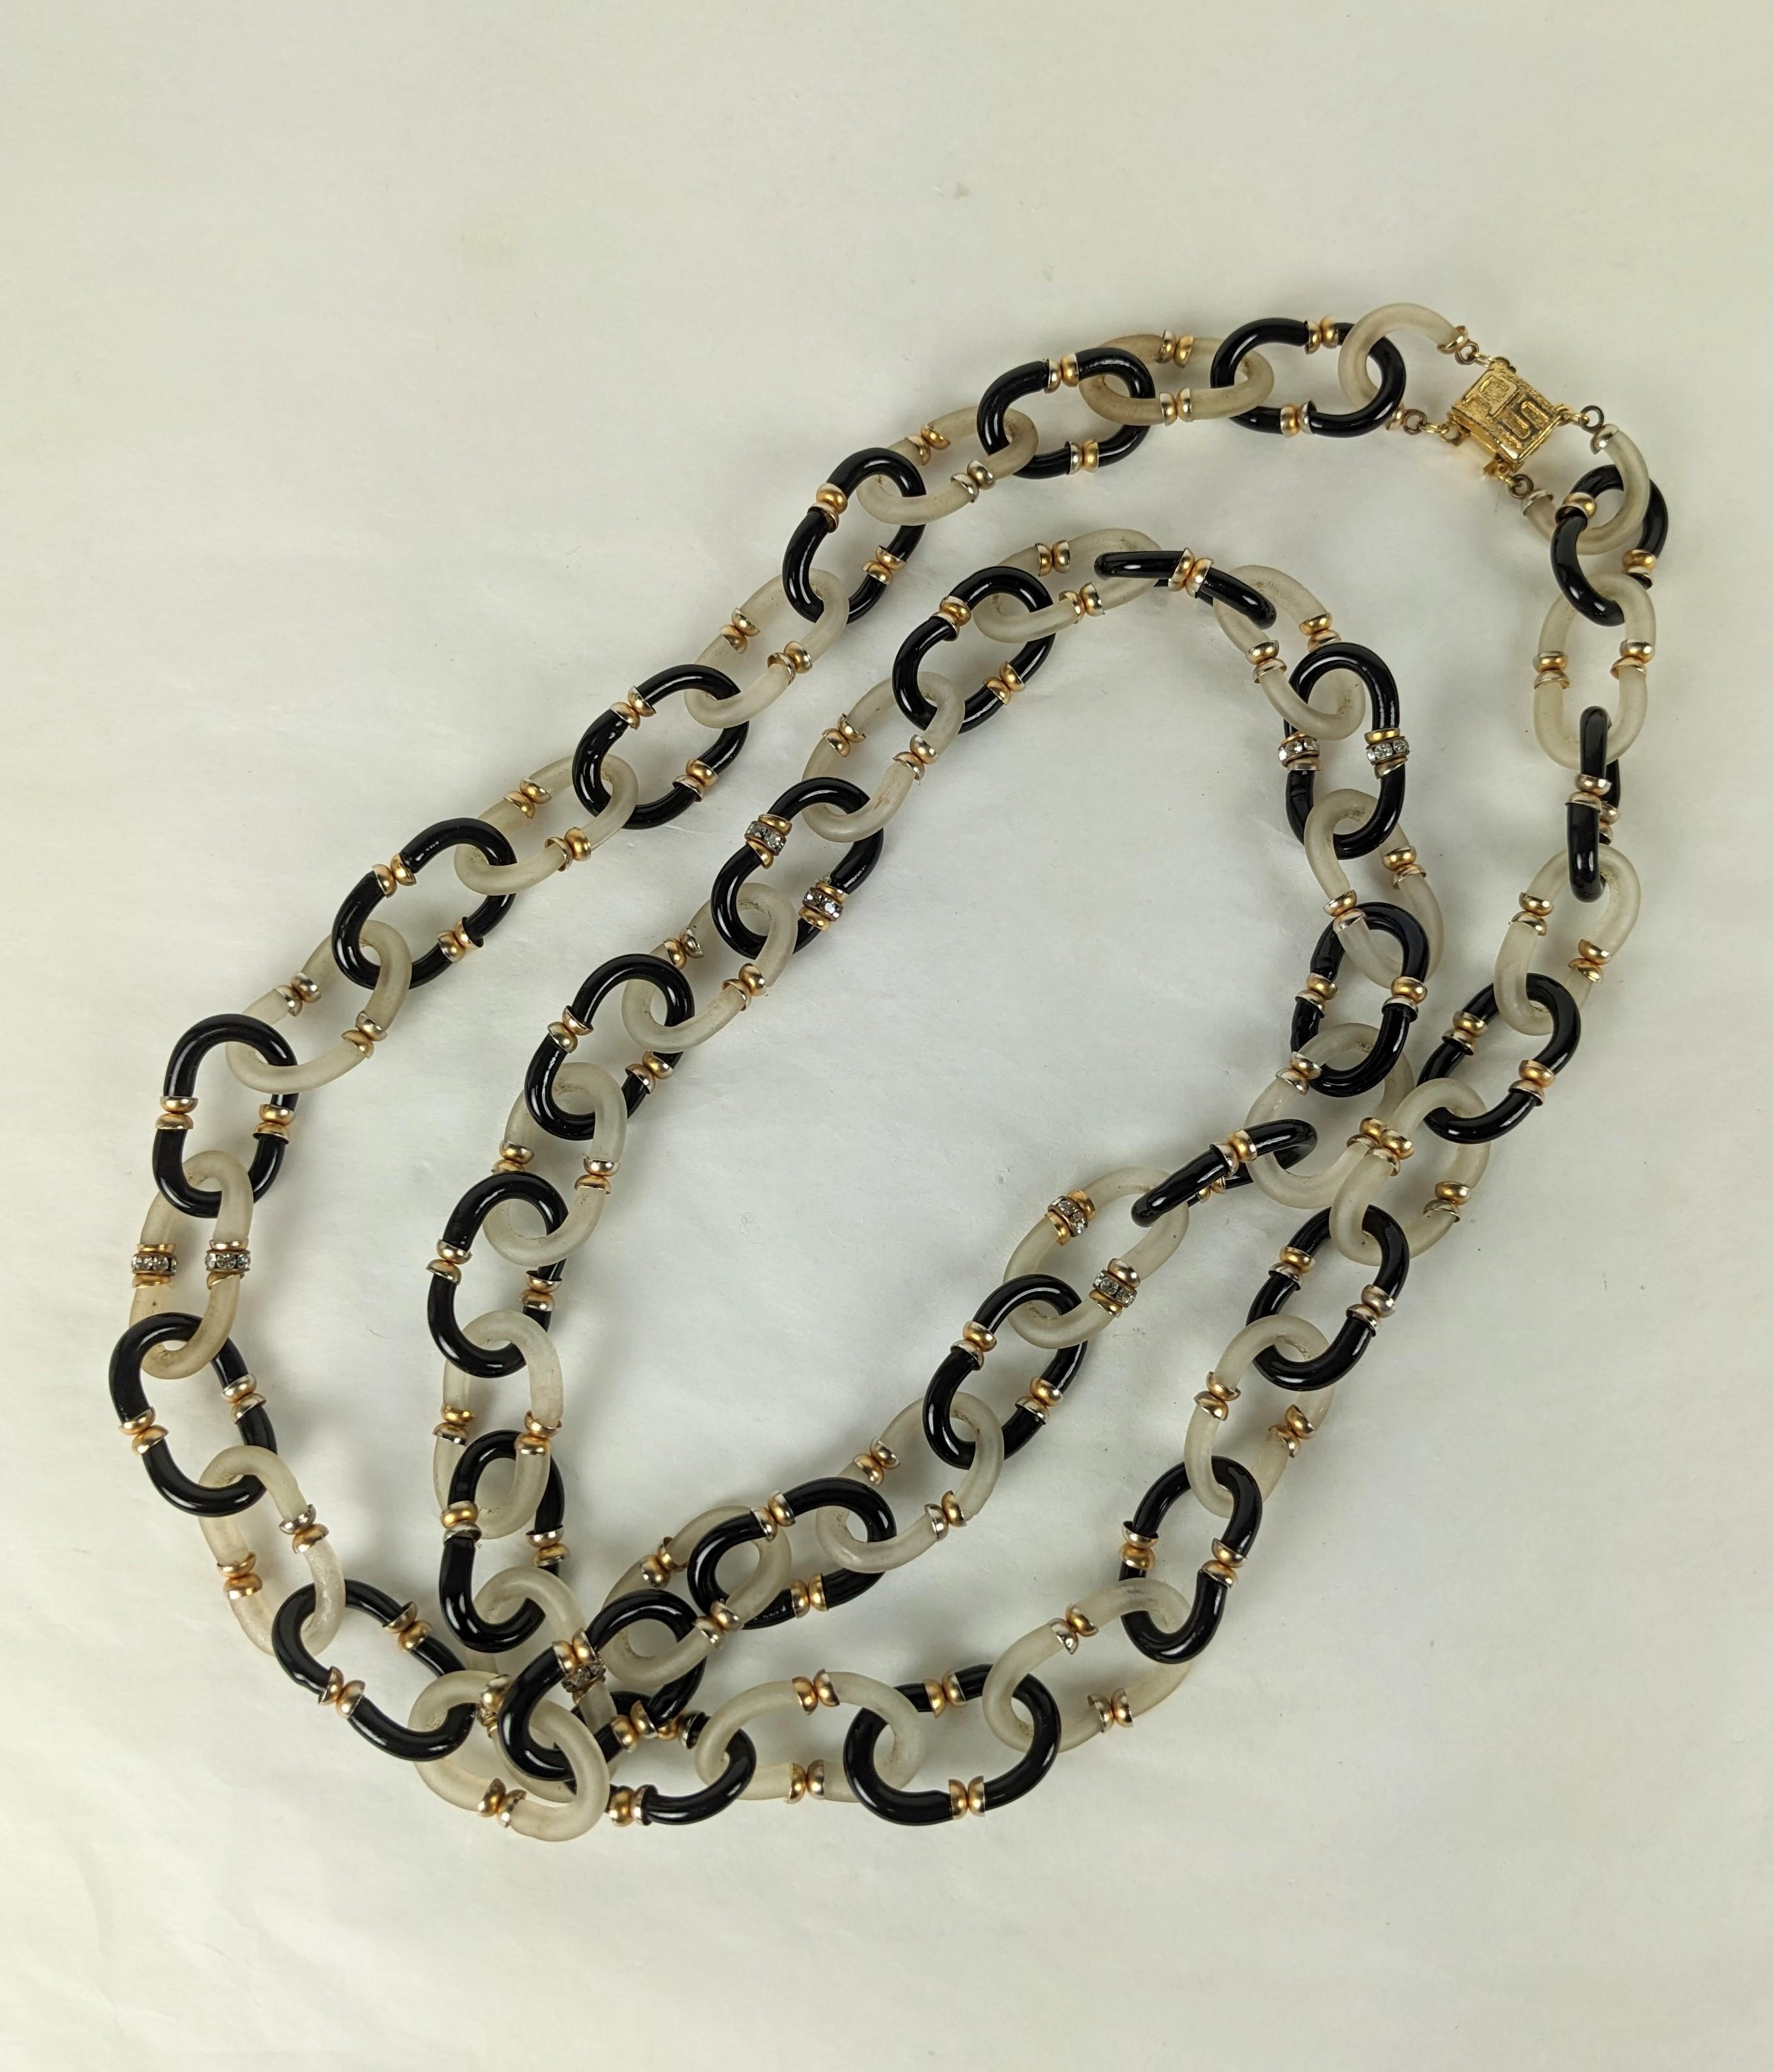 Chanel Seguso 2 Toned Glass Link Chain In Good Condition For Sale In New York, NY